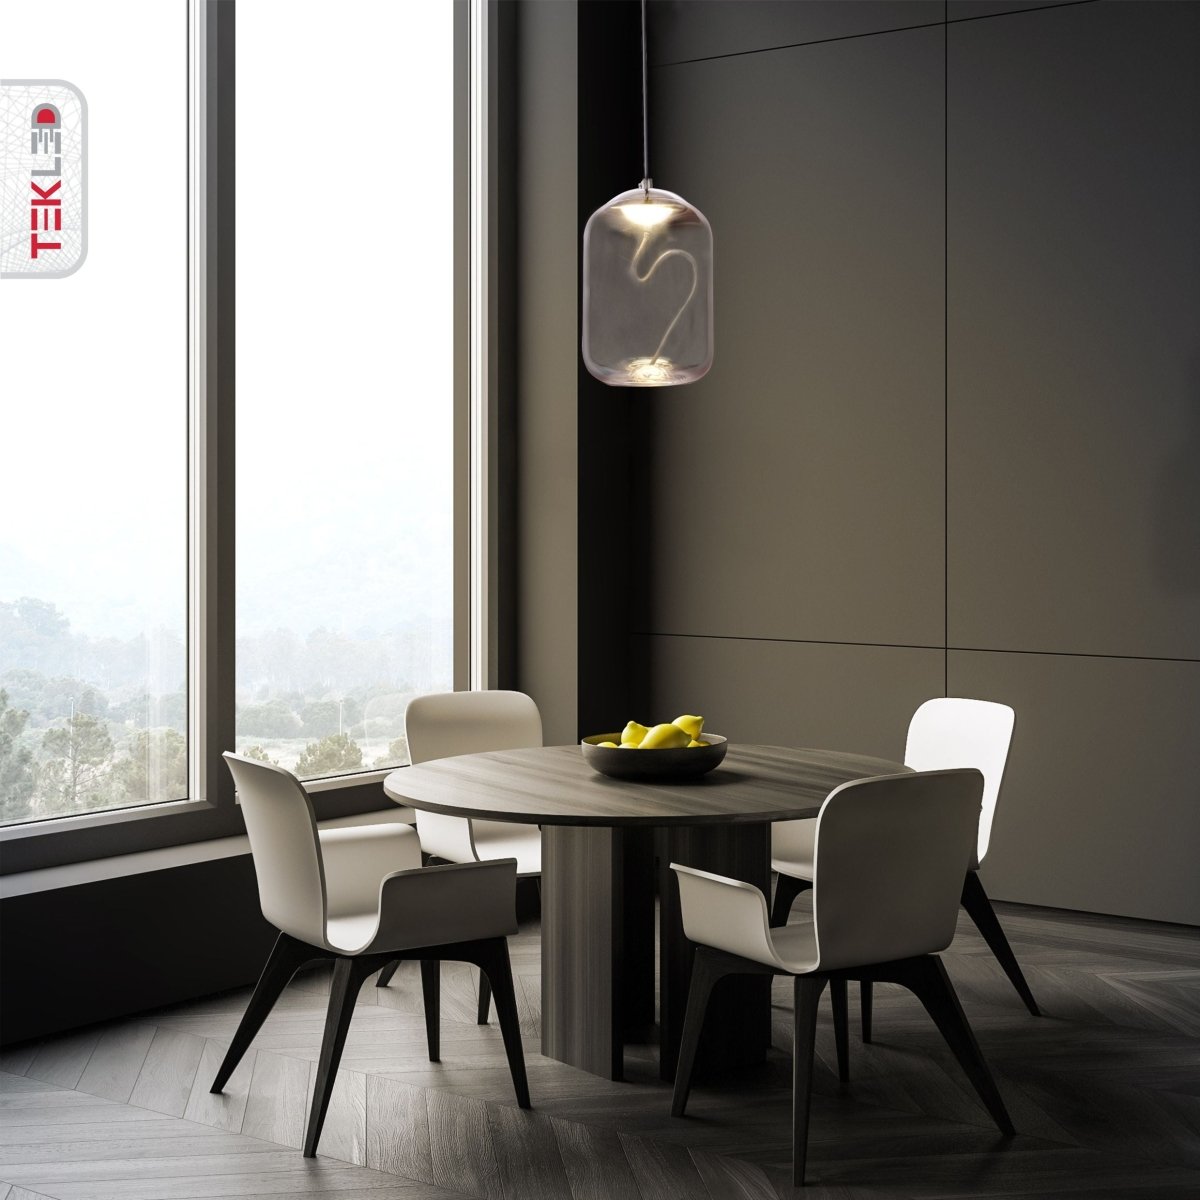 More interior usage of Smoky Glass Cylinder Pendant Light with G9 Fitting | TEKLED 159-17332